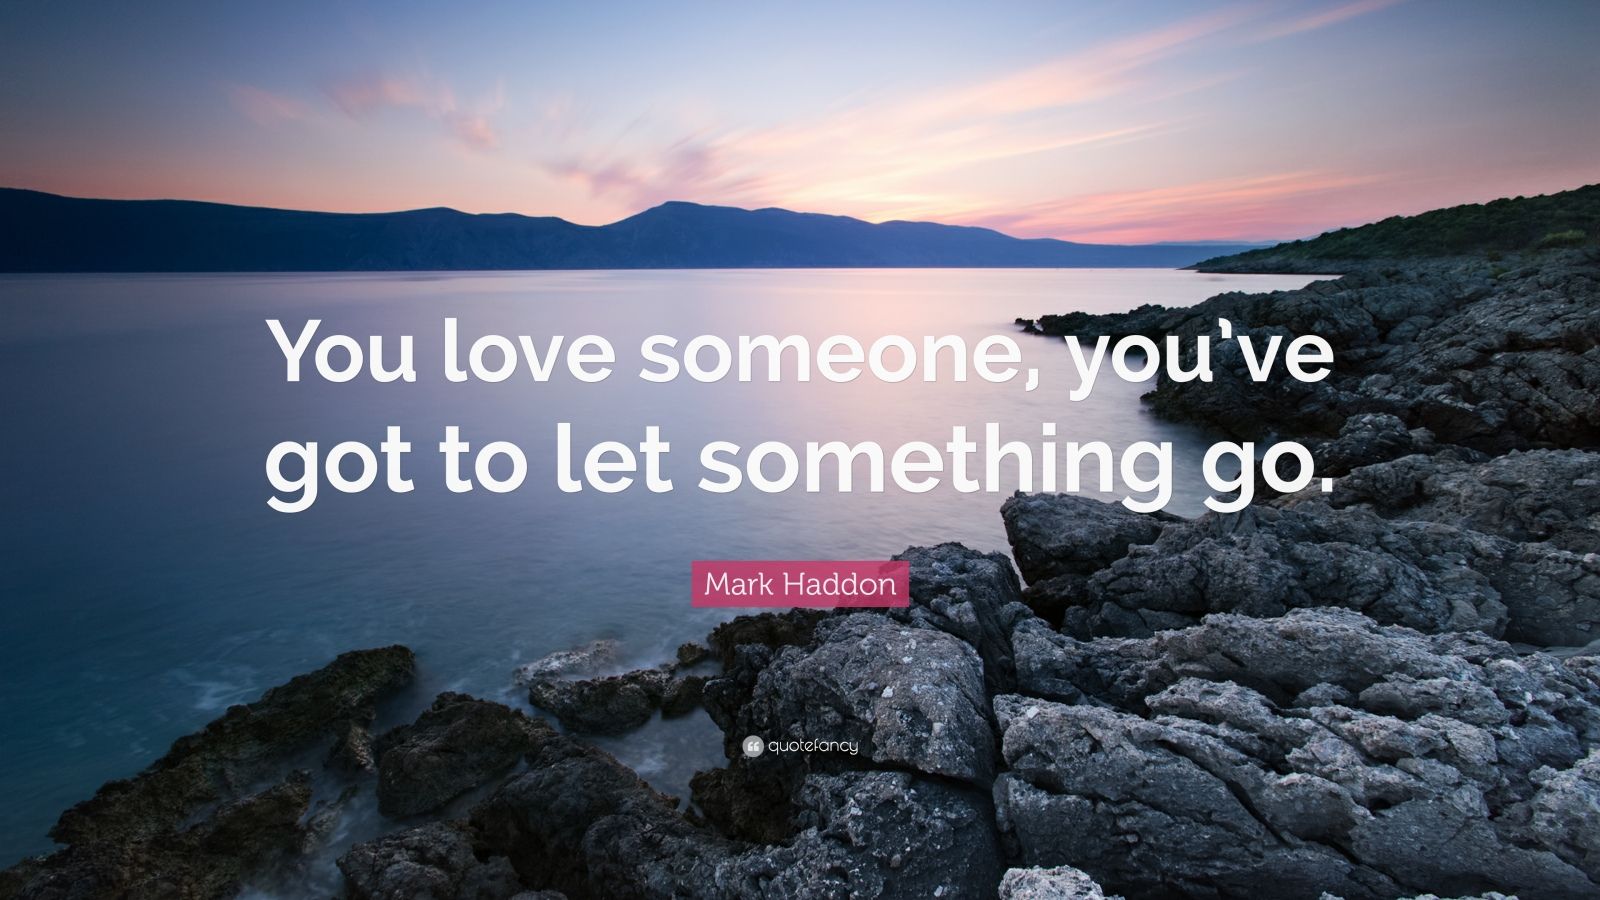 Mark Haddon Quote “You love someone you ve got to let something